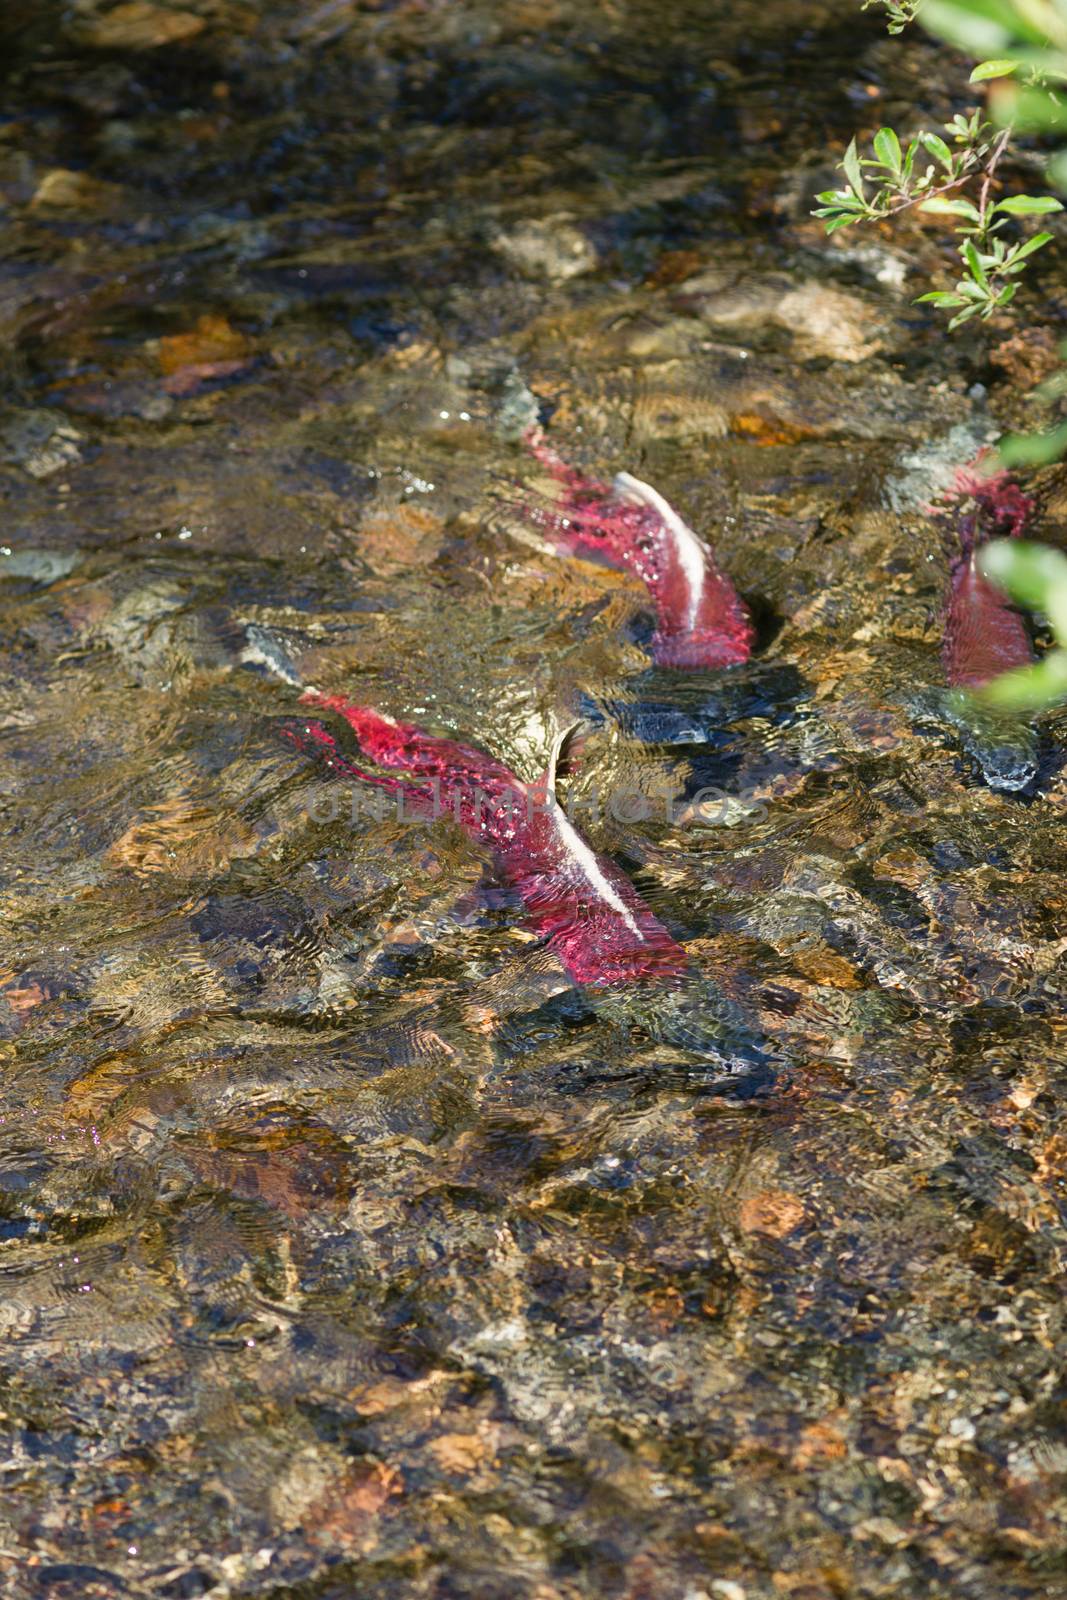 Spawning Fish Salmon Swim Stream Close To Death by ChrisBoswell